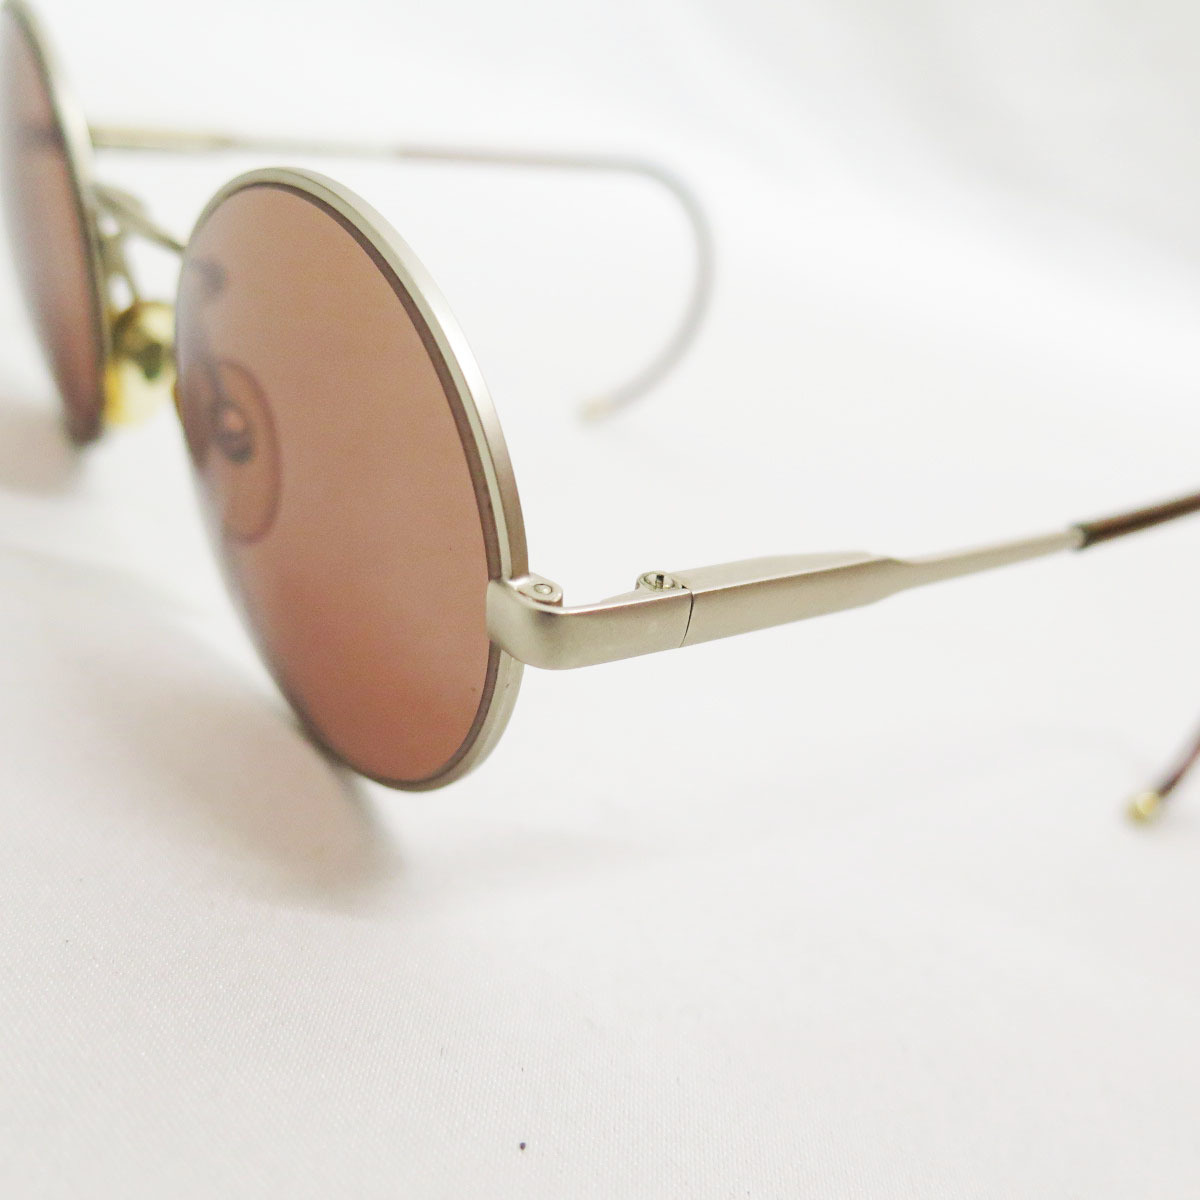 80s - 90s CUTLER AND GROSS VINTAGE ROUND SUNGLASSES カトラー＆グロス ビンテージ ラウンド  フレーム サングラス ヴィンテージ オールド product details | Yahoo! Auctions Japan proxy  bidding and shopping service | FROM JAPAN